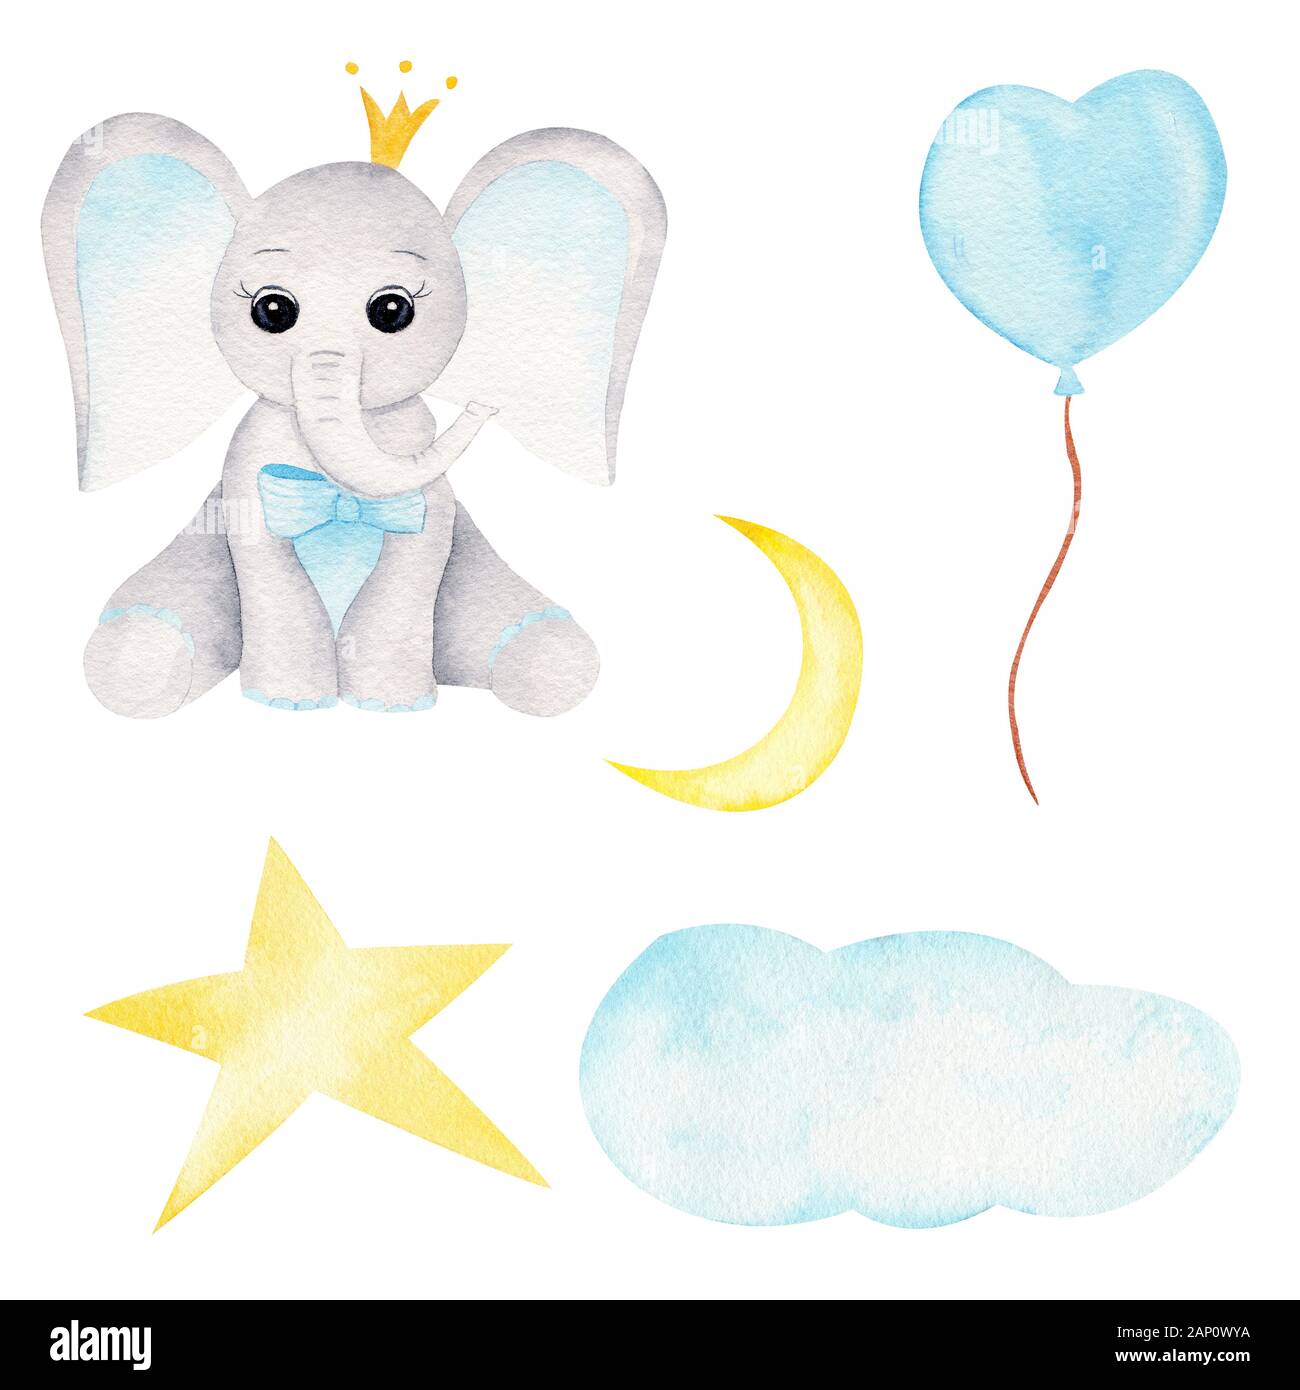 Prince baby elephant hand drawn raster illustration. Animal boy, balloon and celestial bodies watercolor set. Cute aquarelle elephant calf with crown Stock Photo